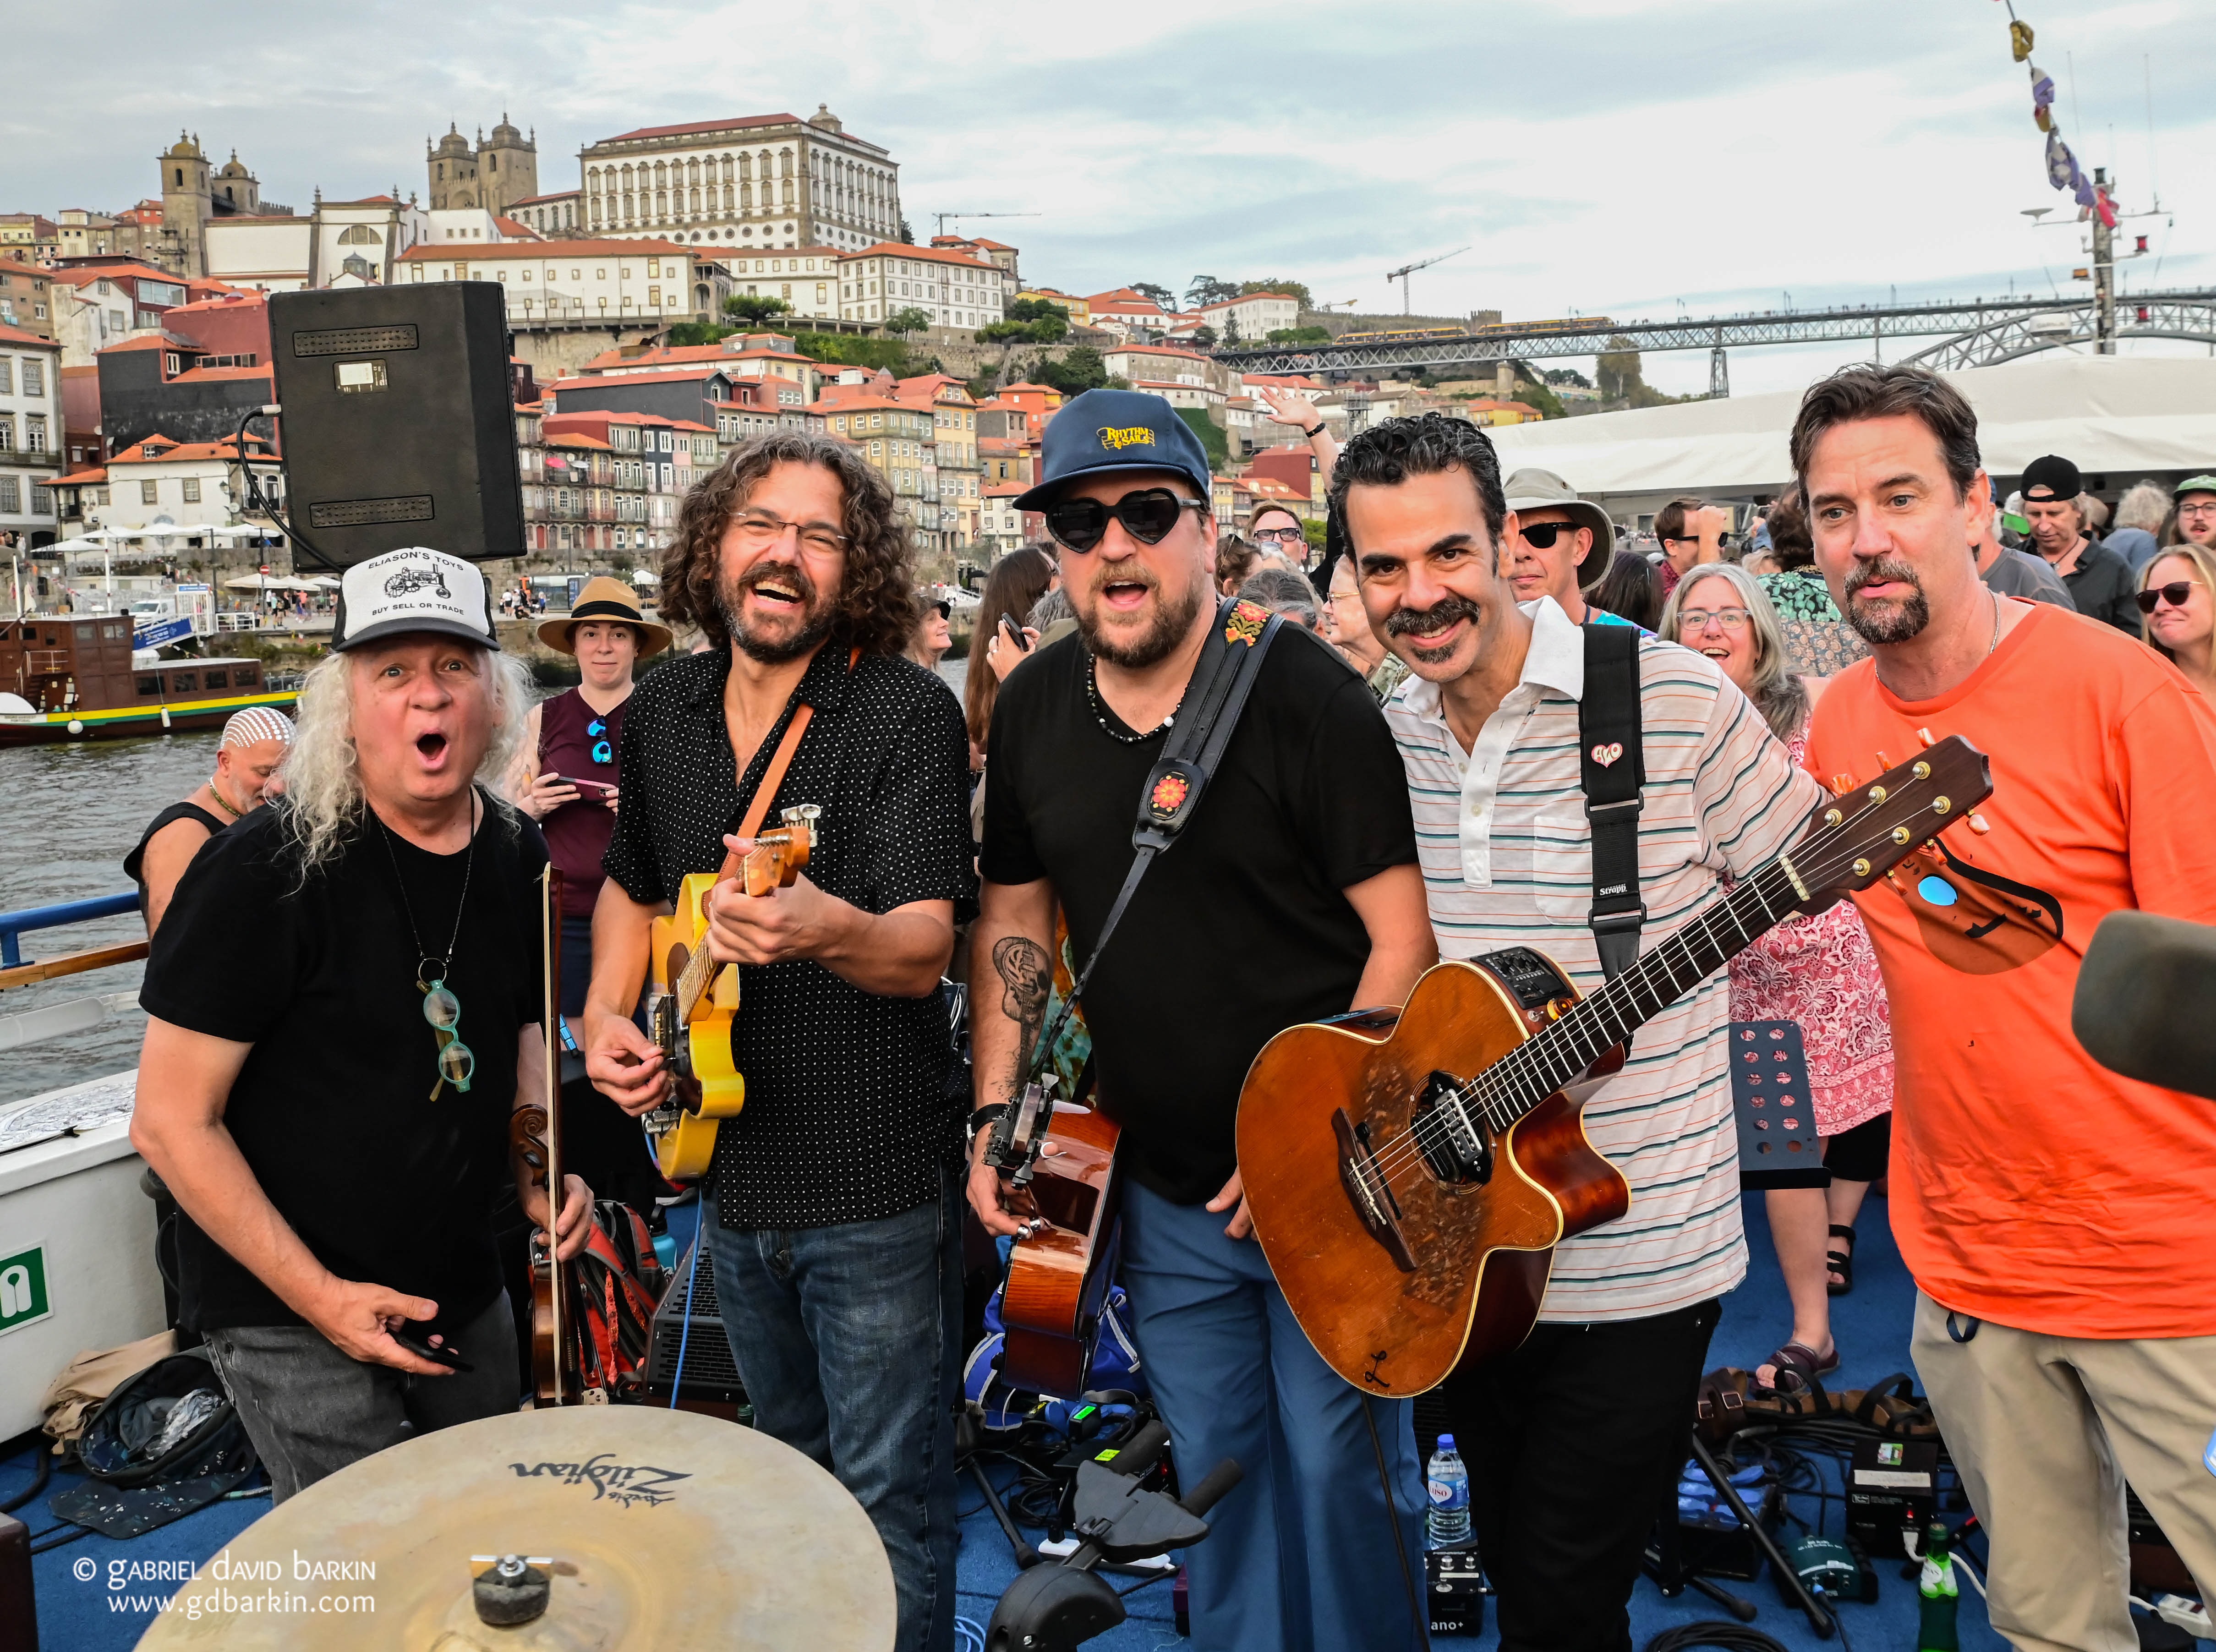 A Musical Sojourn in Porto, with Members of Greensky Bluegrass, Railroad Earth, TAB, ALO, Fruition, and More